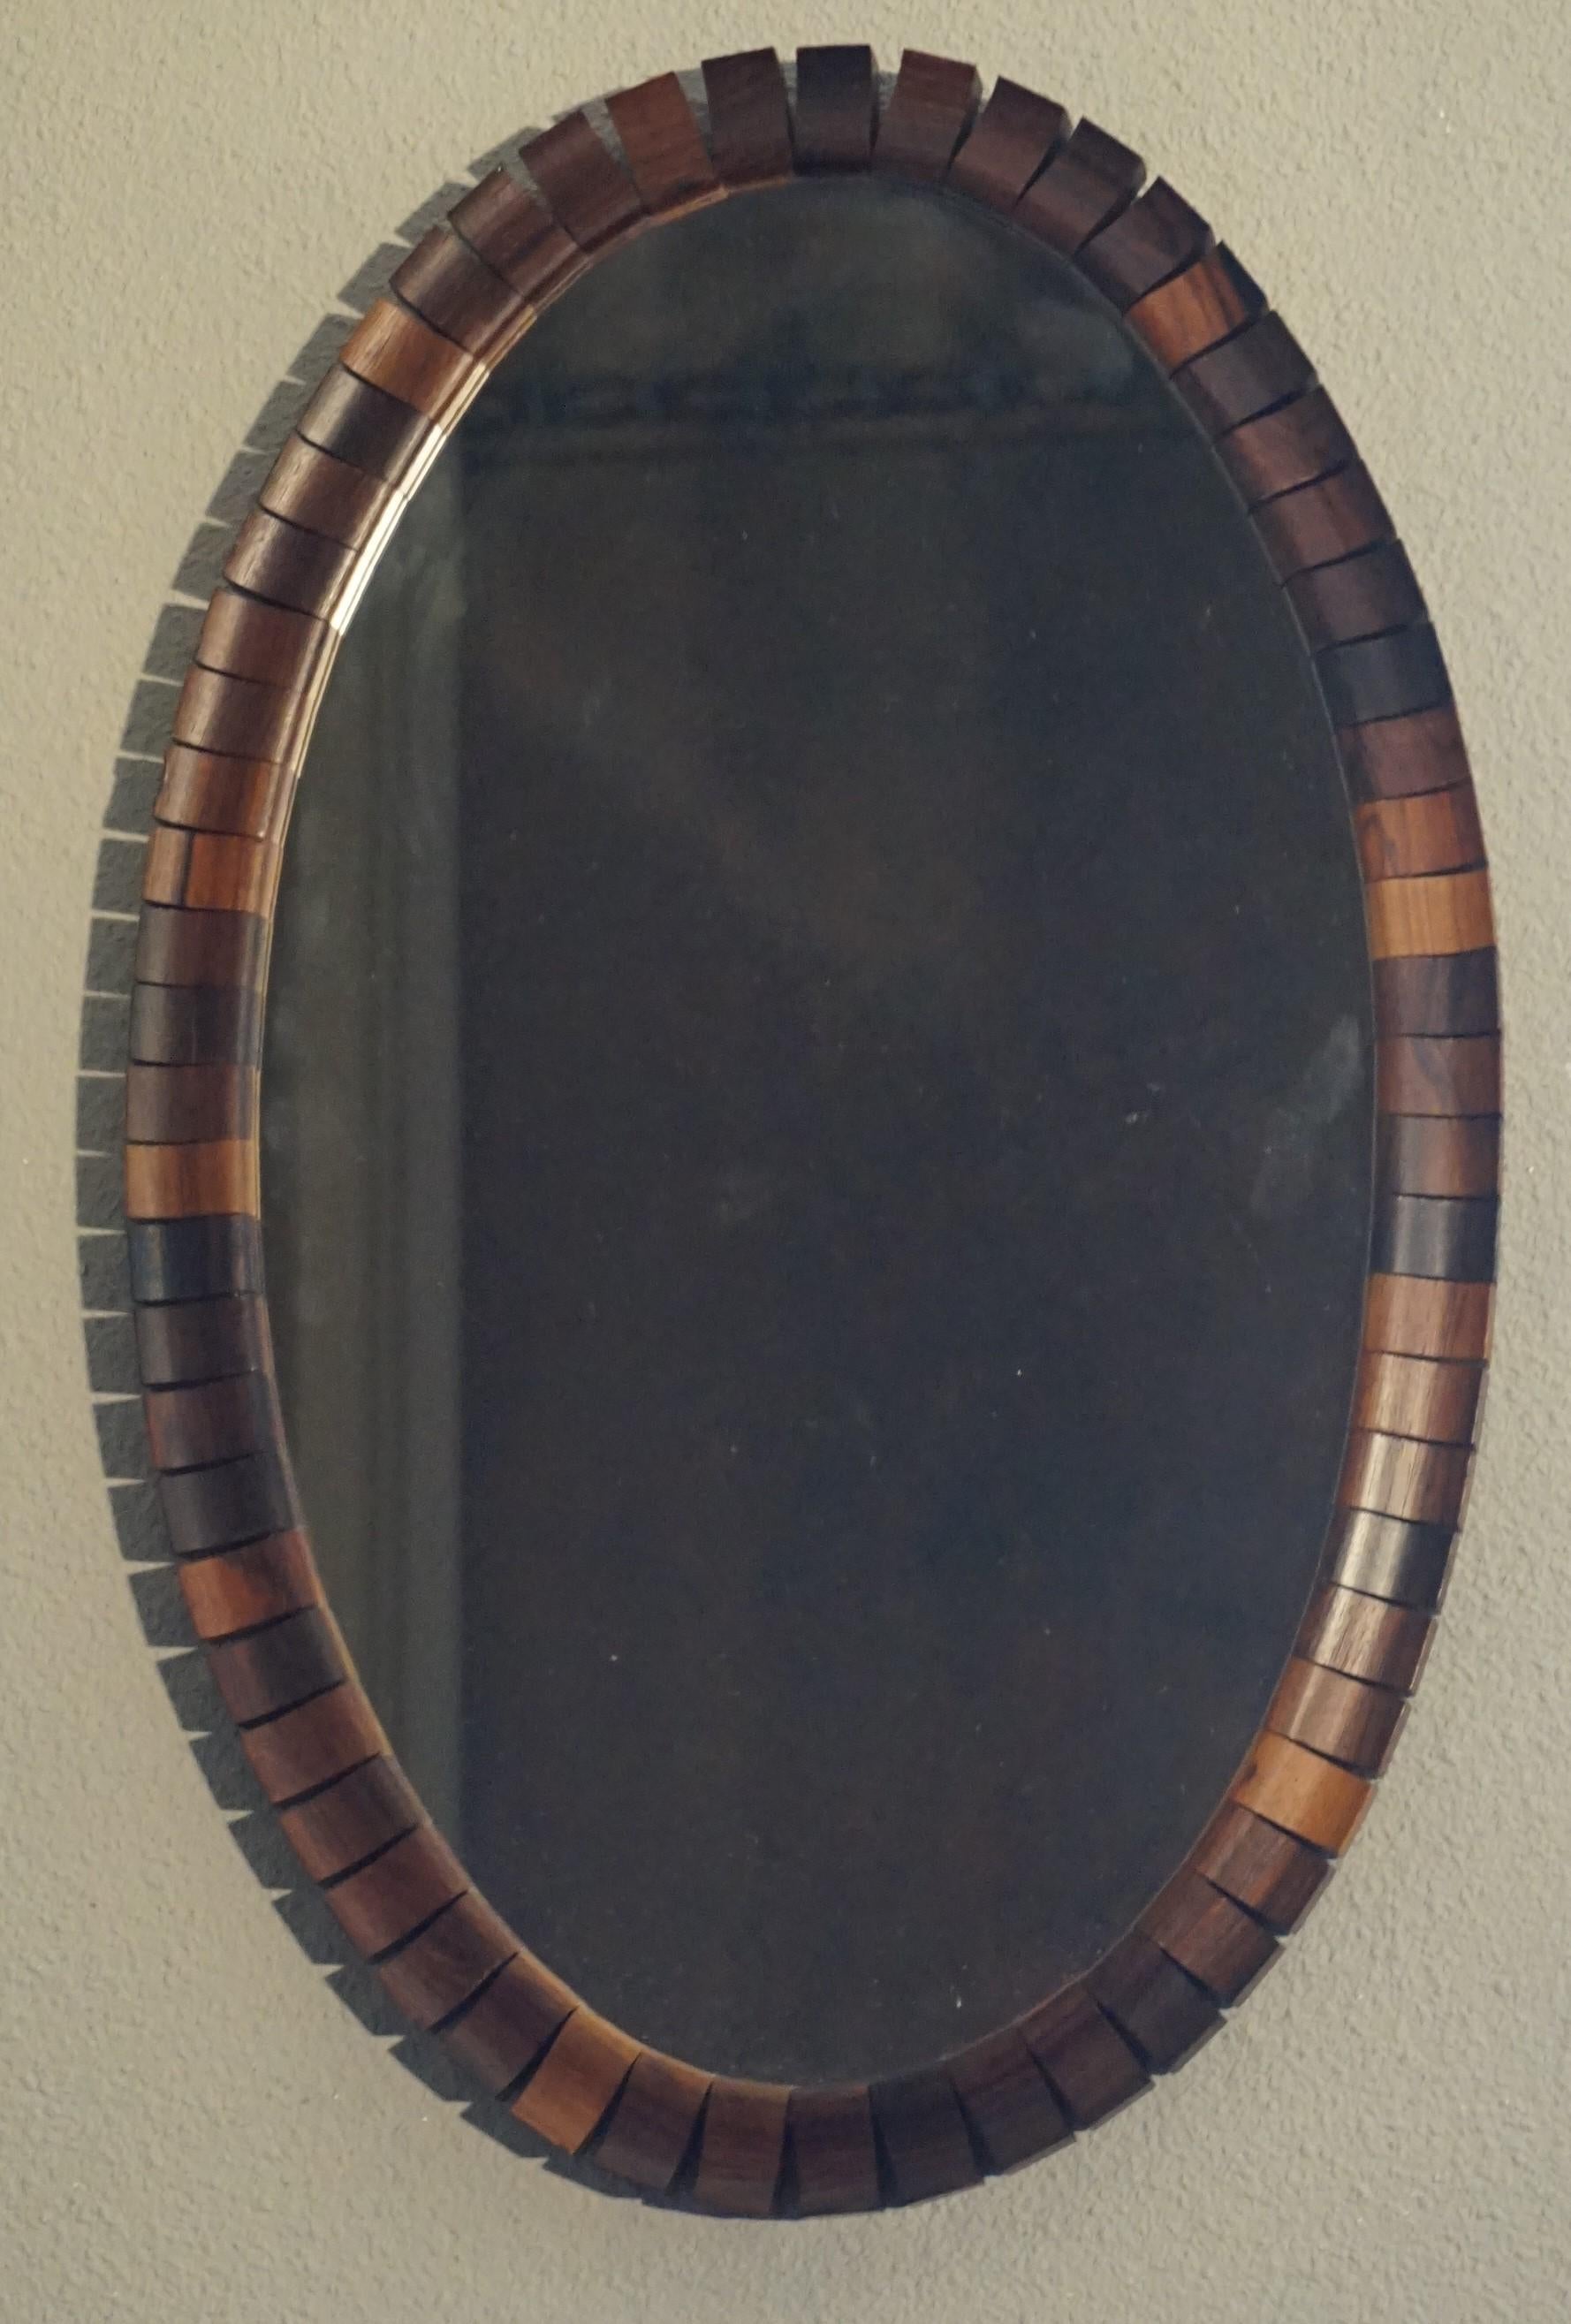 Striking Mid-Century Modern Oval Mirror in Handcrafted Geometrical Wooden Frame For Sale 6